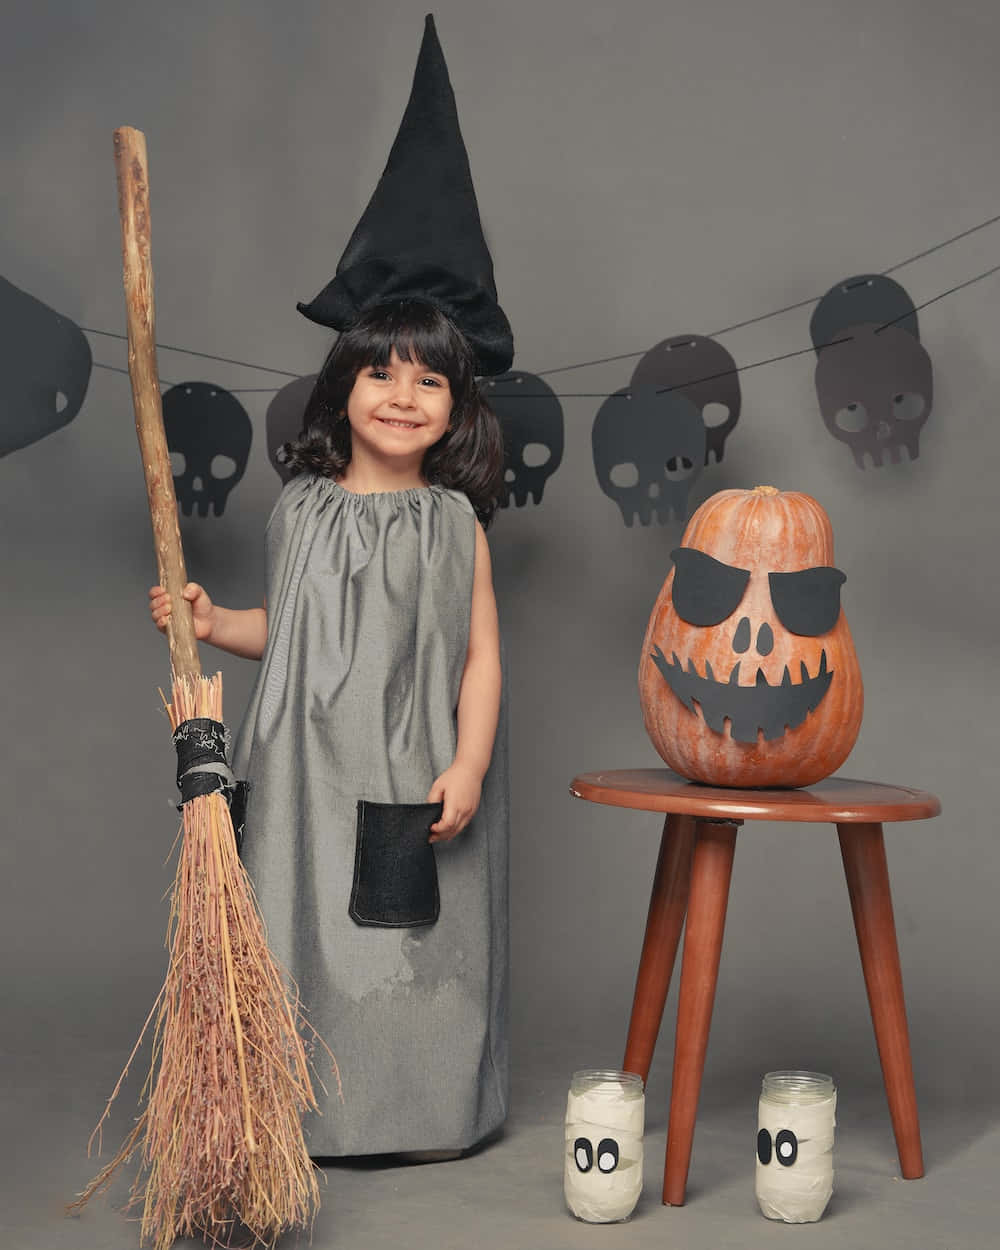 Dress up for Trick-or-Treating this Halloween